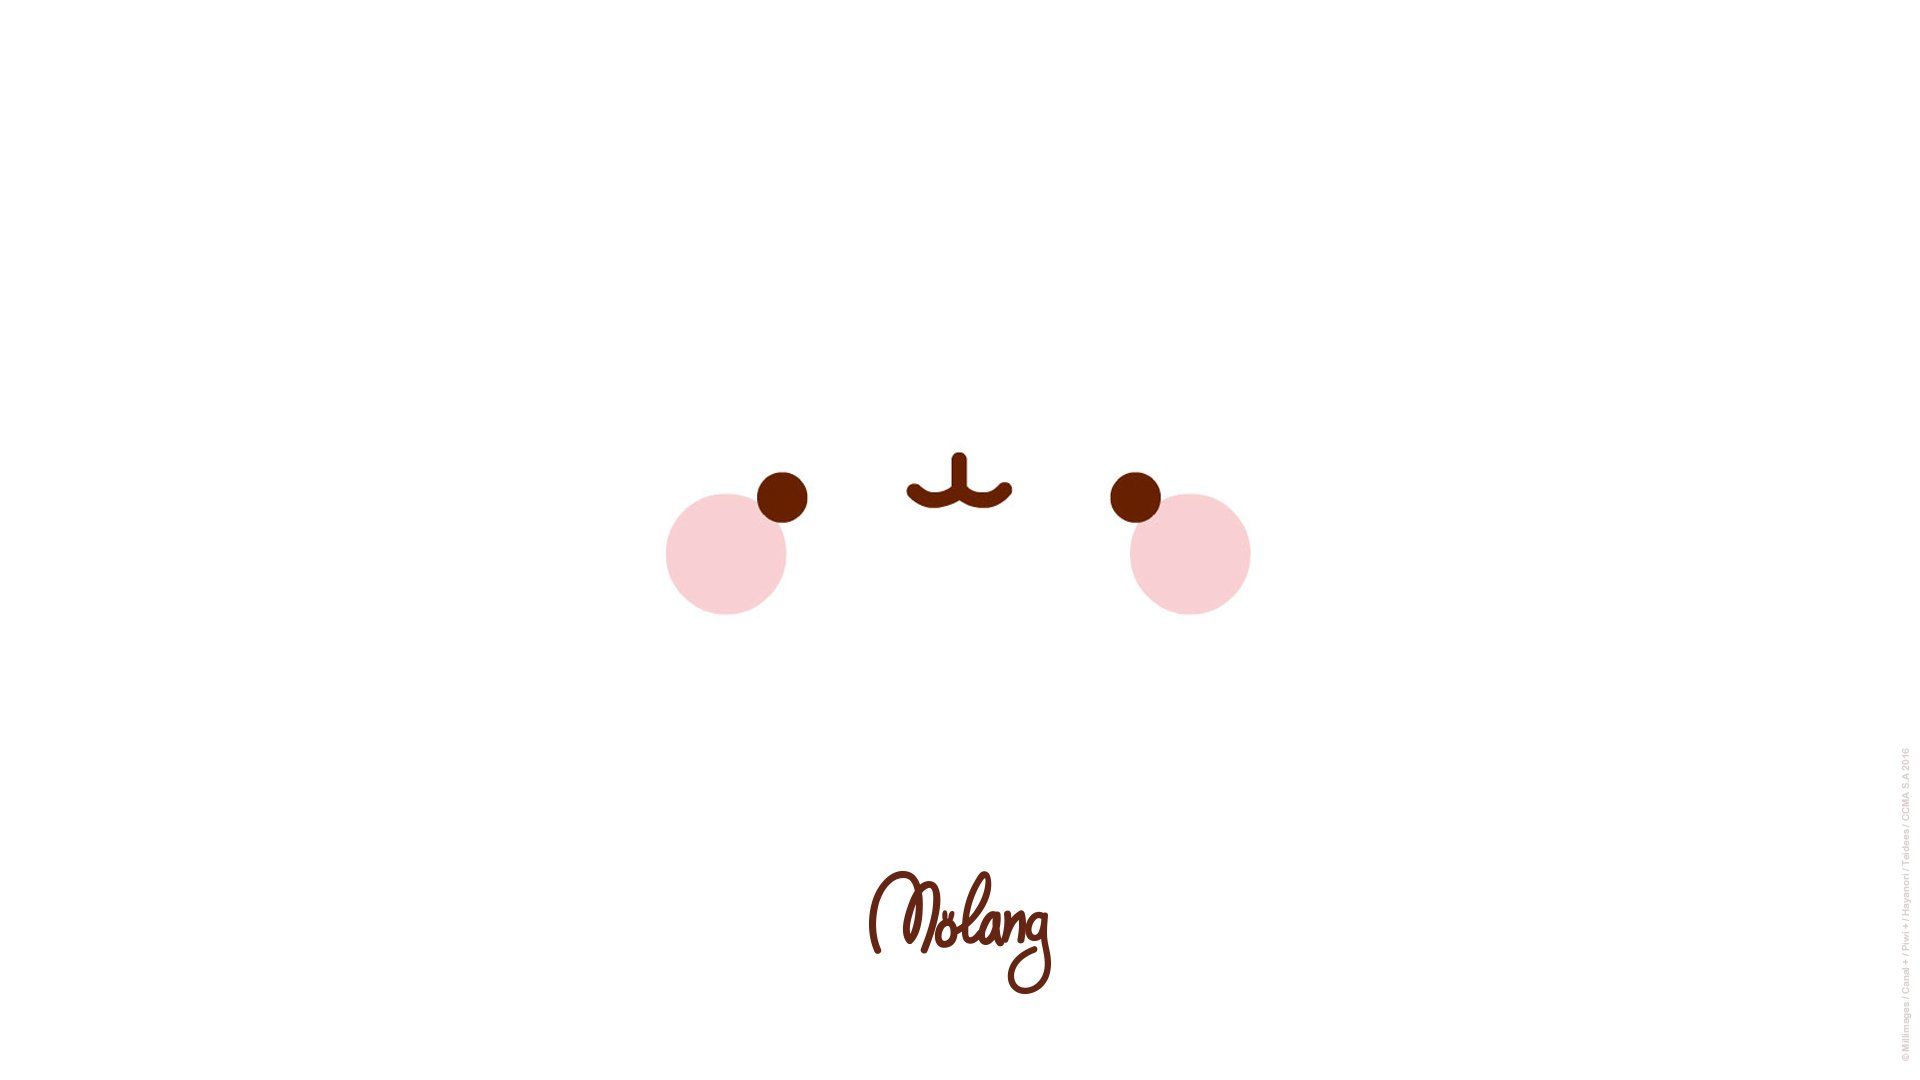 Molang to customise your desktop and your phone with our official #Molang and #PiuPiu wallpaper? Now you can!